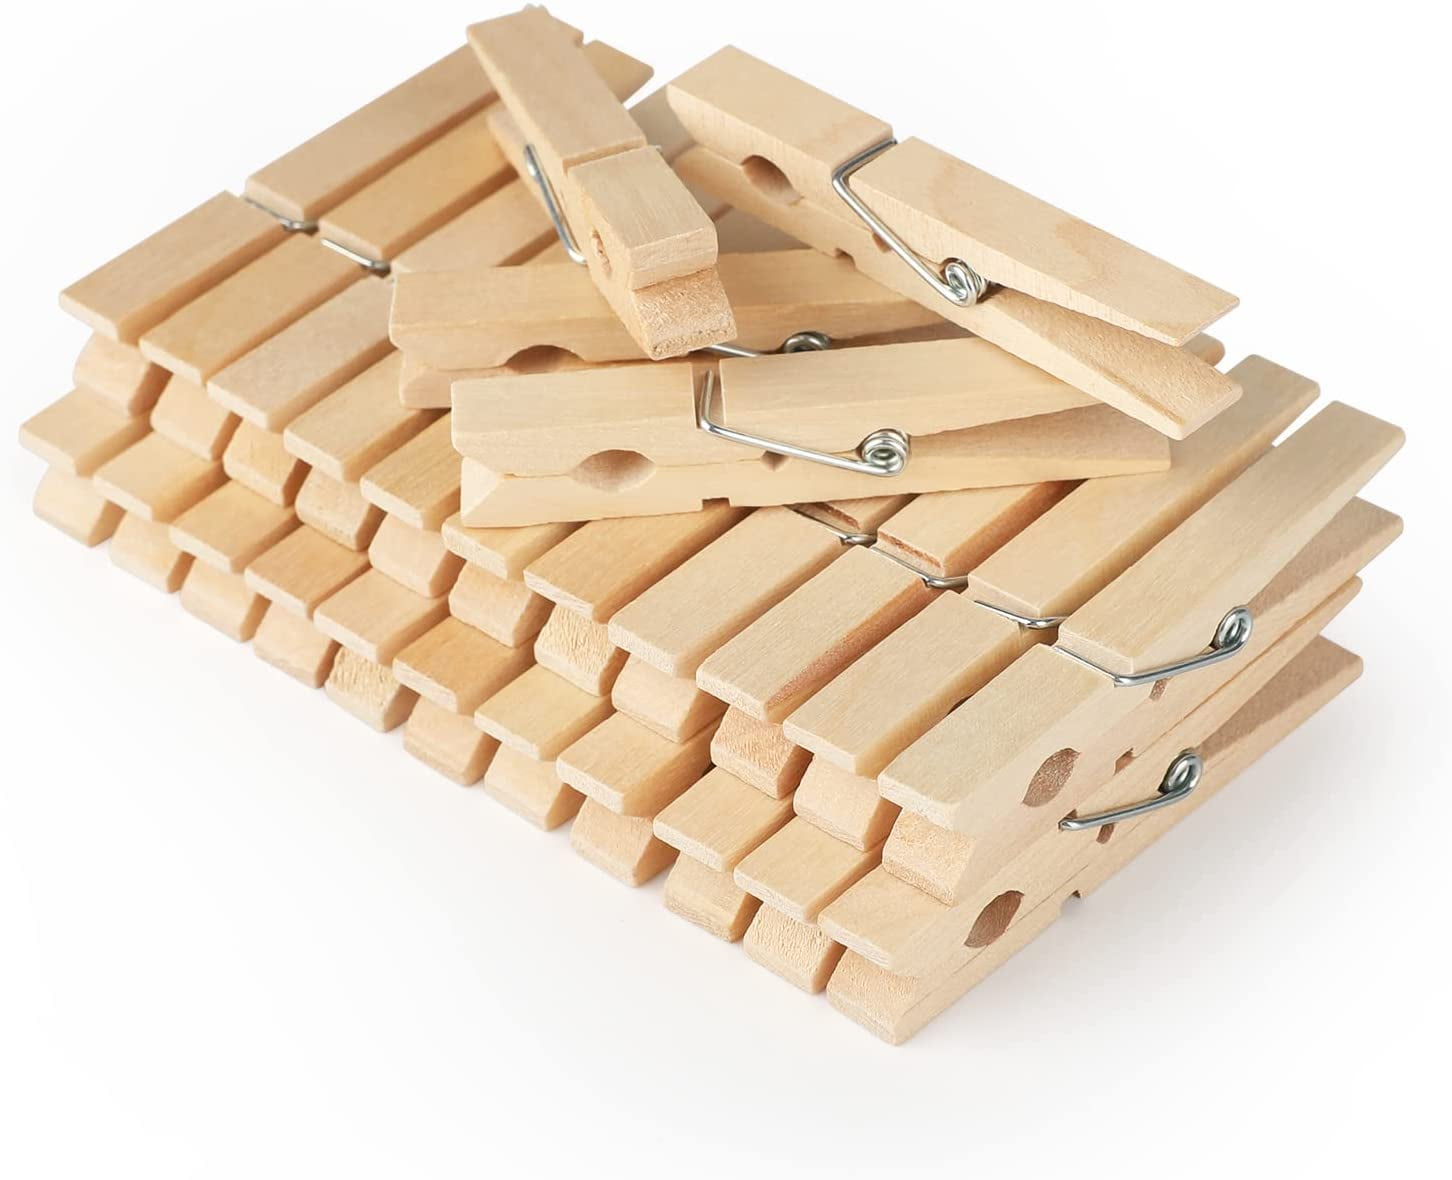 50 Log Color Wooden Clothes Pegs With Picture Rail Hooks Argos Home Storage  Folder For Clothe Items Decorative Peg Drop Pins 25/35/45mm From  Ffshop2001, $4.76